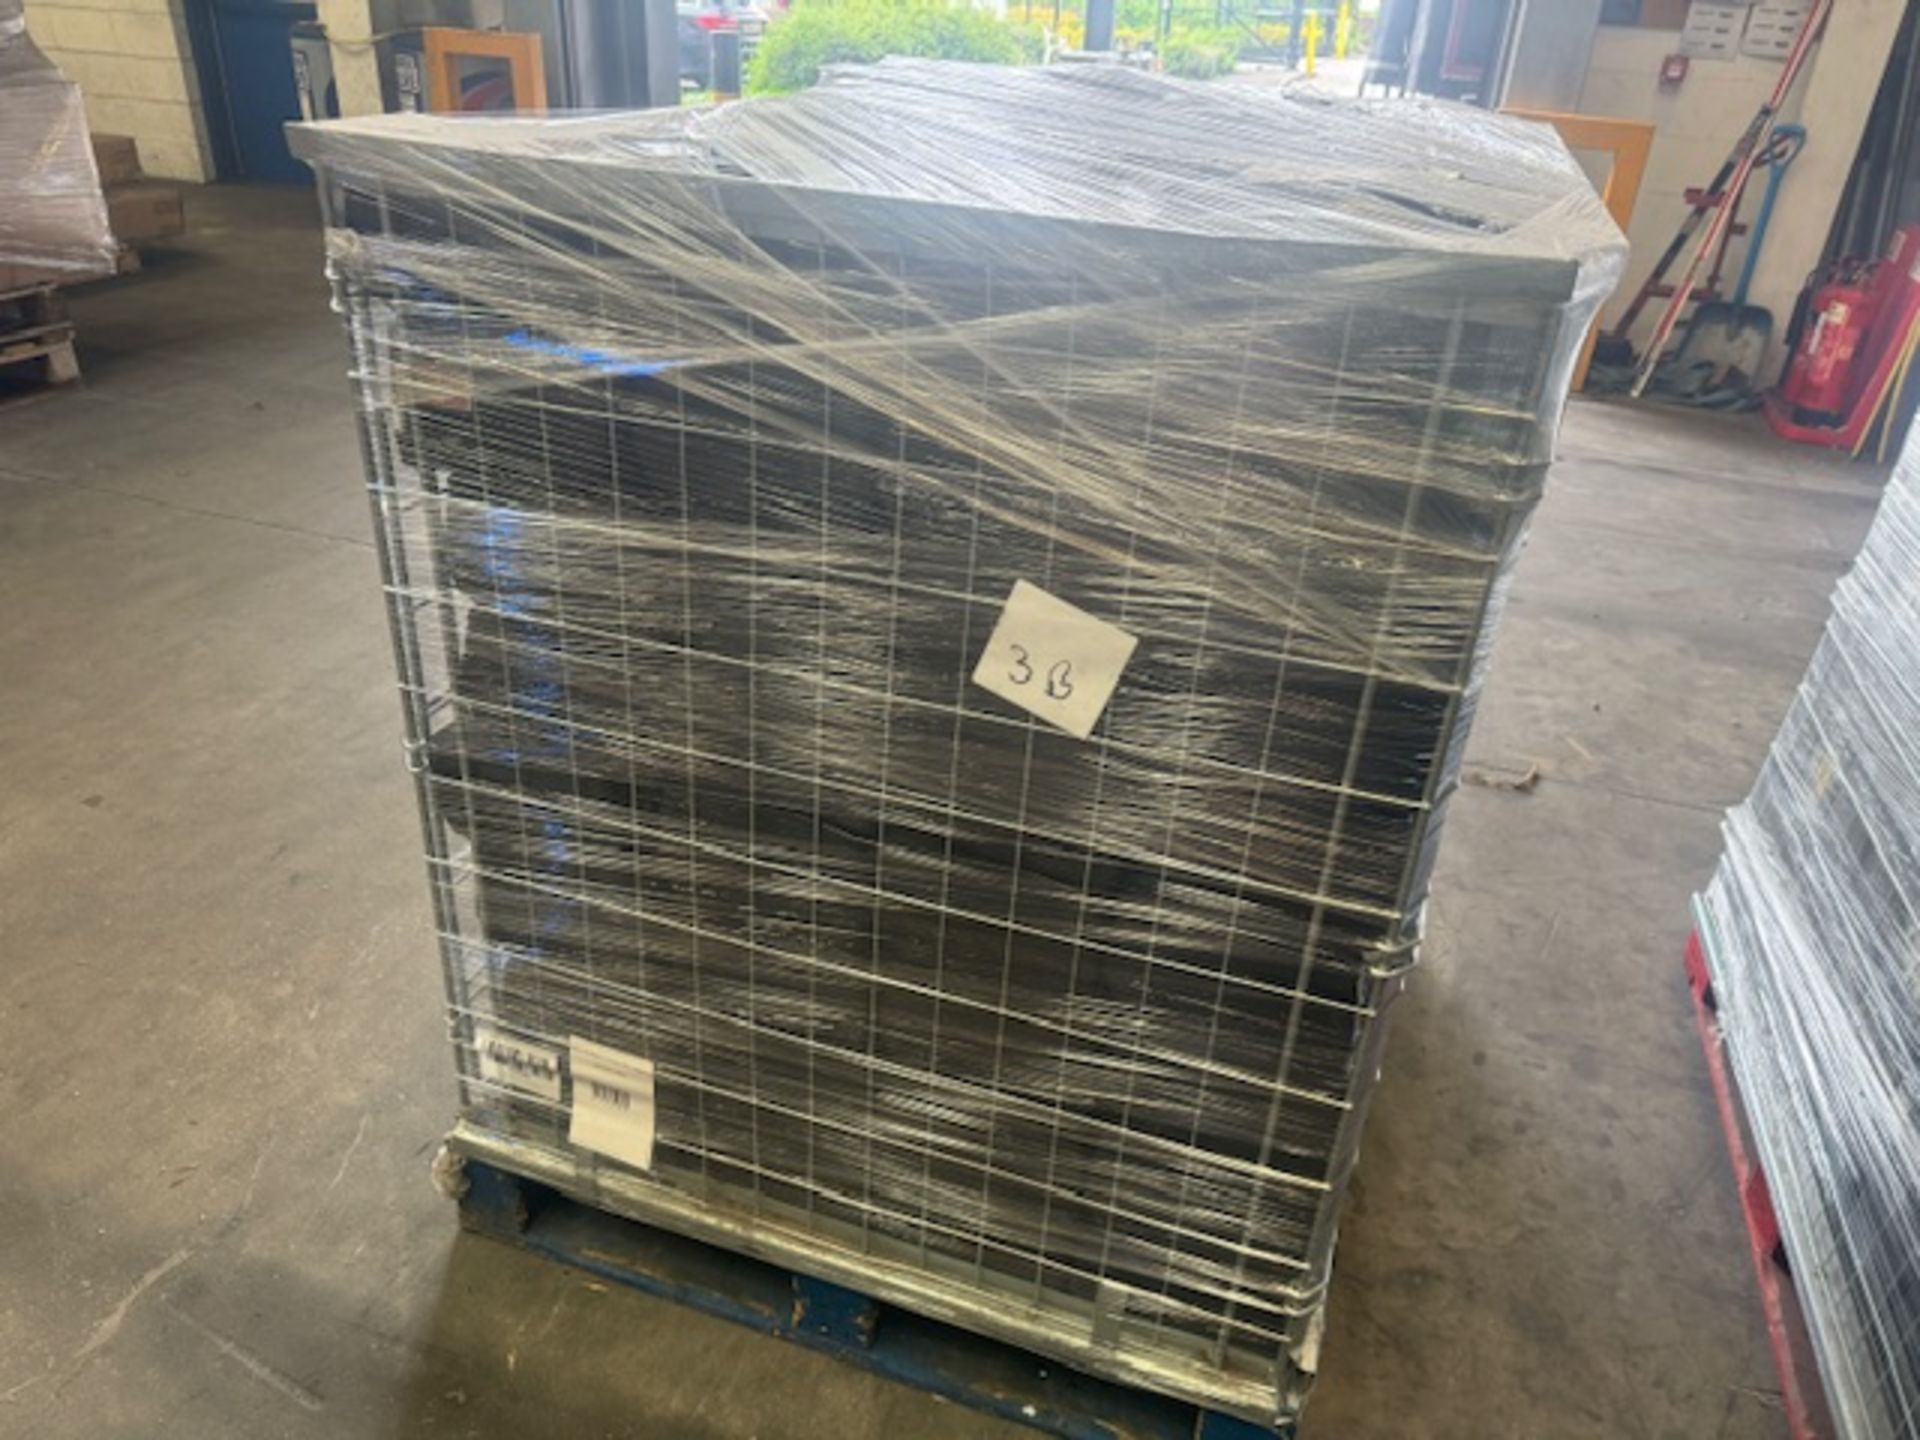 IT PALLET TO CONTAIN 256 TOSHIBA TECHNOLOGY TILL PRINTERS APPROX PRICE NEW 100K